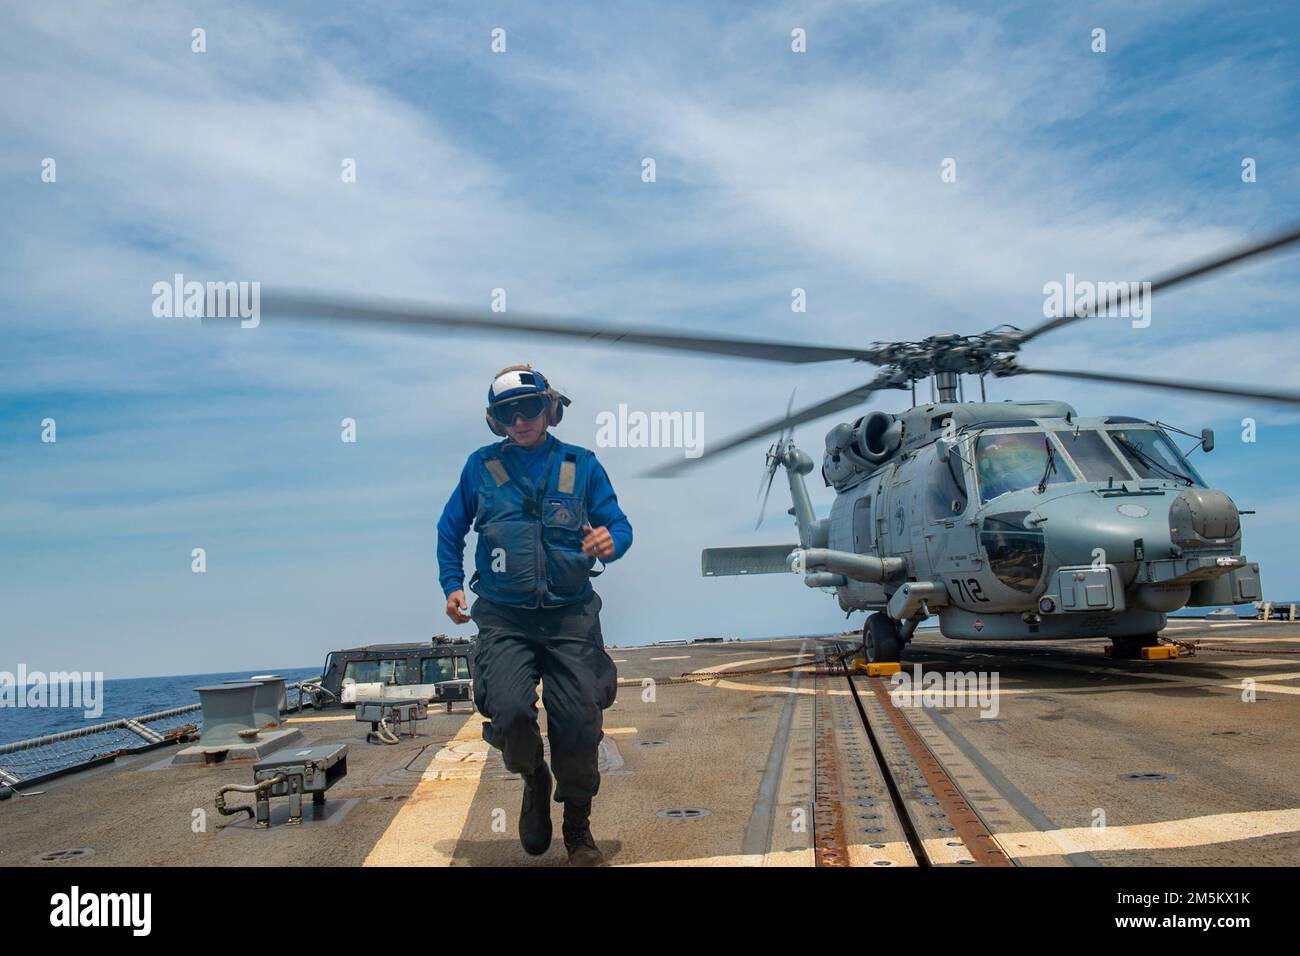 SOUTH CHINA SEA (March 23, 2022) Seaman Michael Blanchard, from Panama City Beach, Fla., returns to a safe distance after placing chocks and chains on a landing MH-60R Sea Hawk helicopter, assigned to the “Raptors” of Helicopter Maritime Strike Squadron (HSM) 71, on the flight deck of Arleigh Burke-class guided-missile destroyer USS Spruance (DDG 111). Abraham Lincoln Strike Group is on a scheduled deployment in the U.S. 7th Fleet area of operations to enhance interoperability through alliances and partnerships while serving as a ready-response force in support of a free and open Indo-Pacific Stock Photo